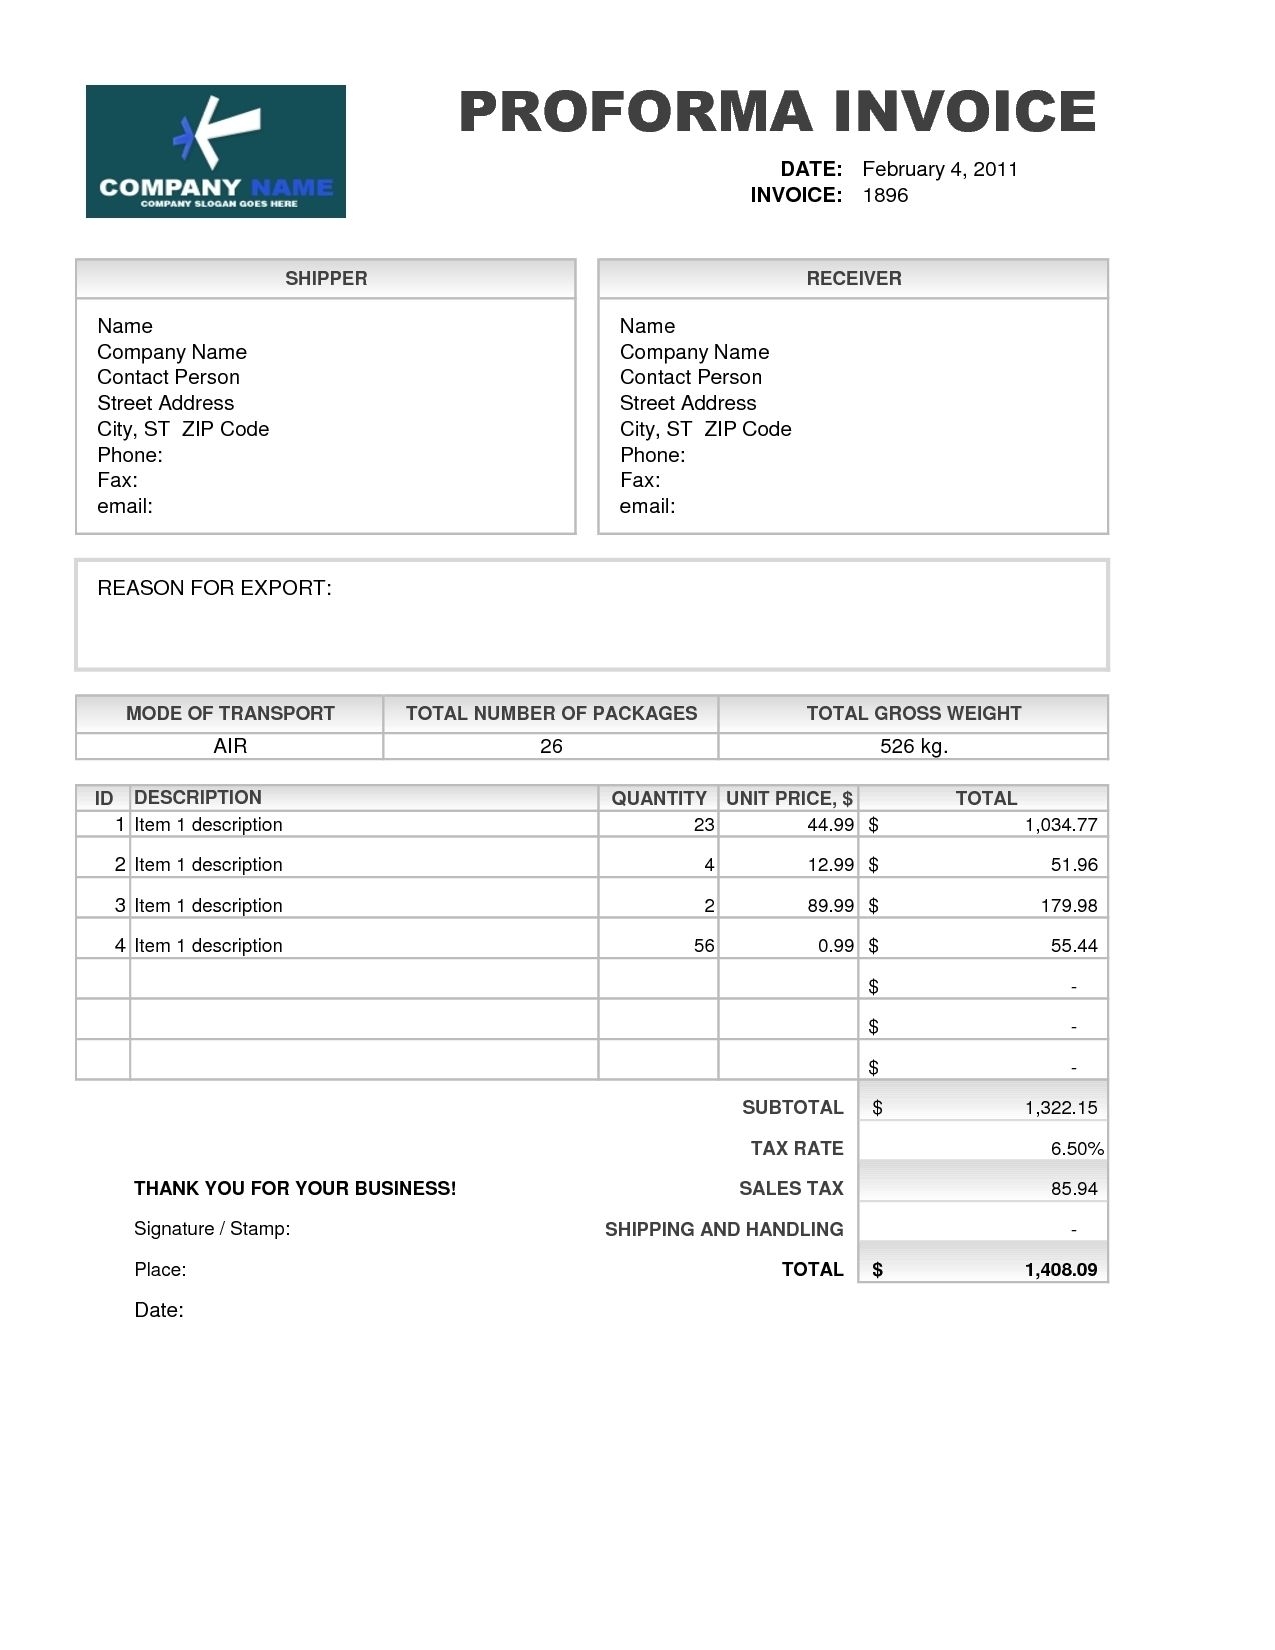 samples of proforma invoice invoice template free 2016 definition of a proforma invoice